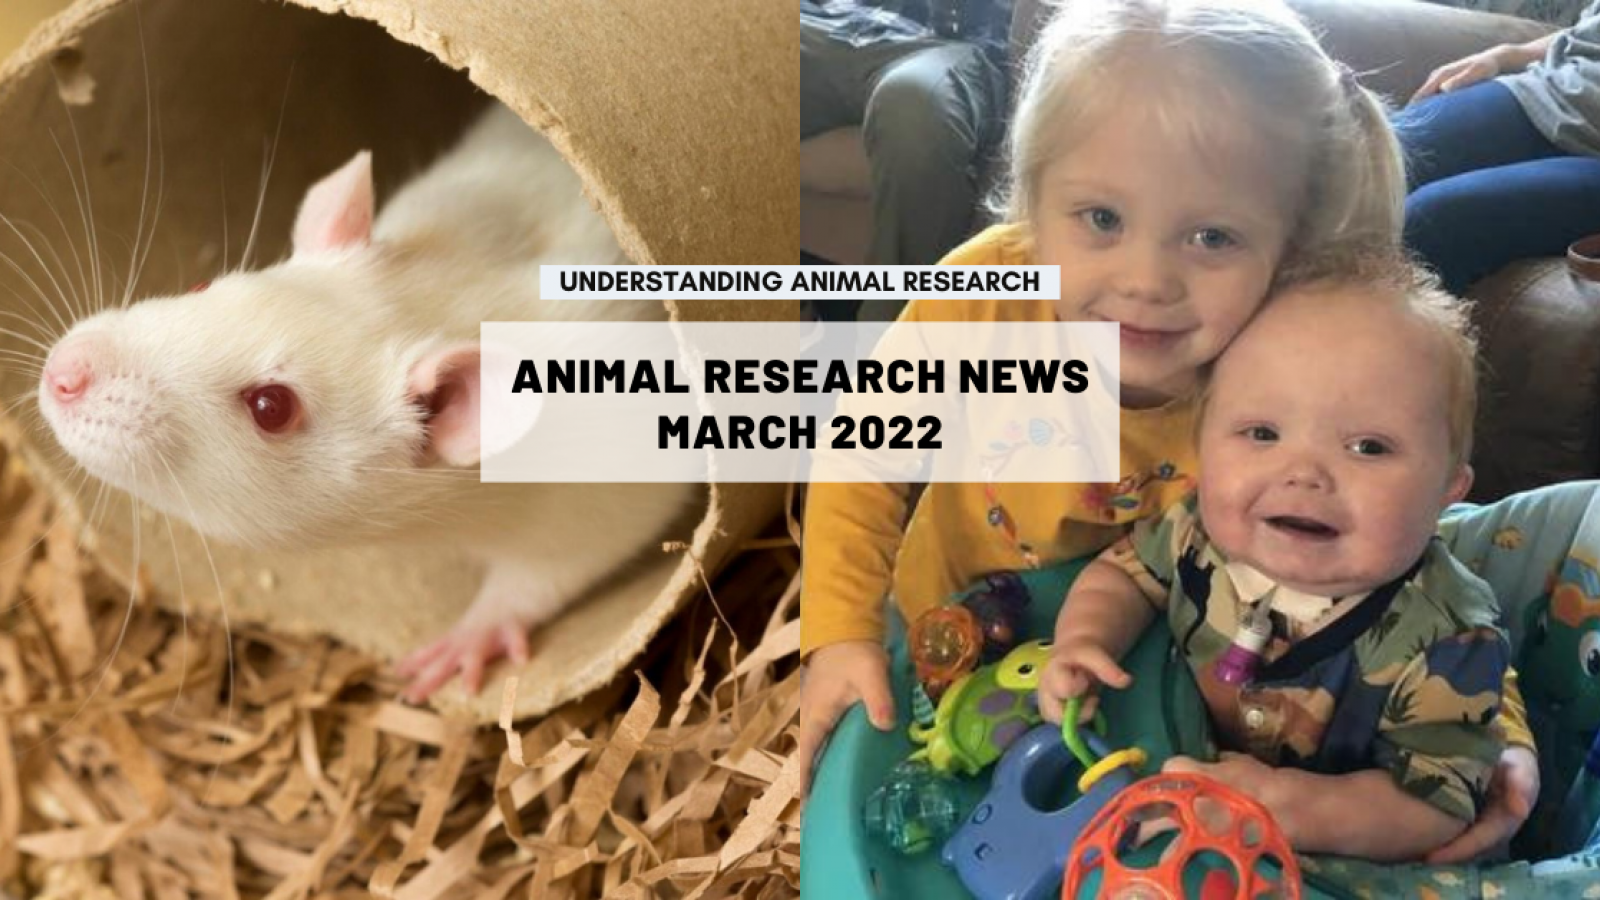 Animal research news: March 2022